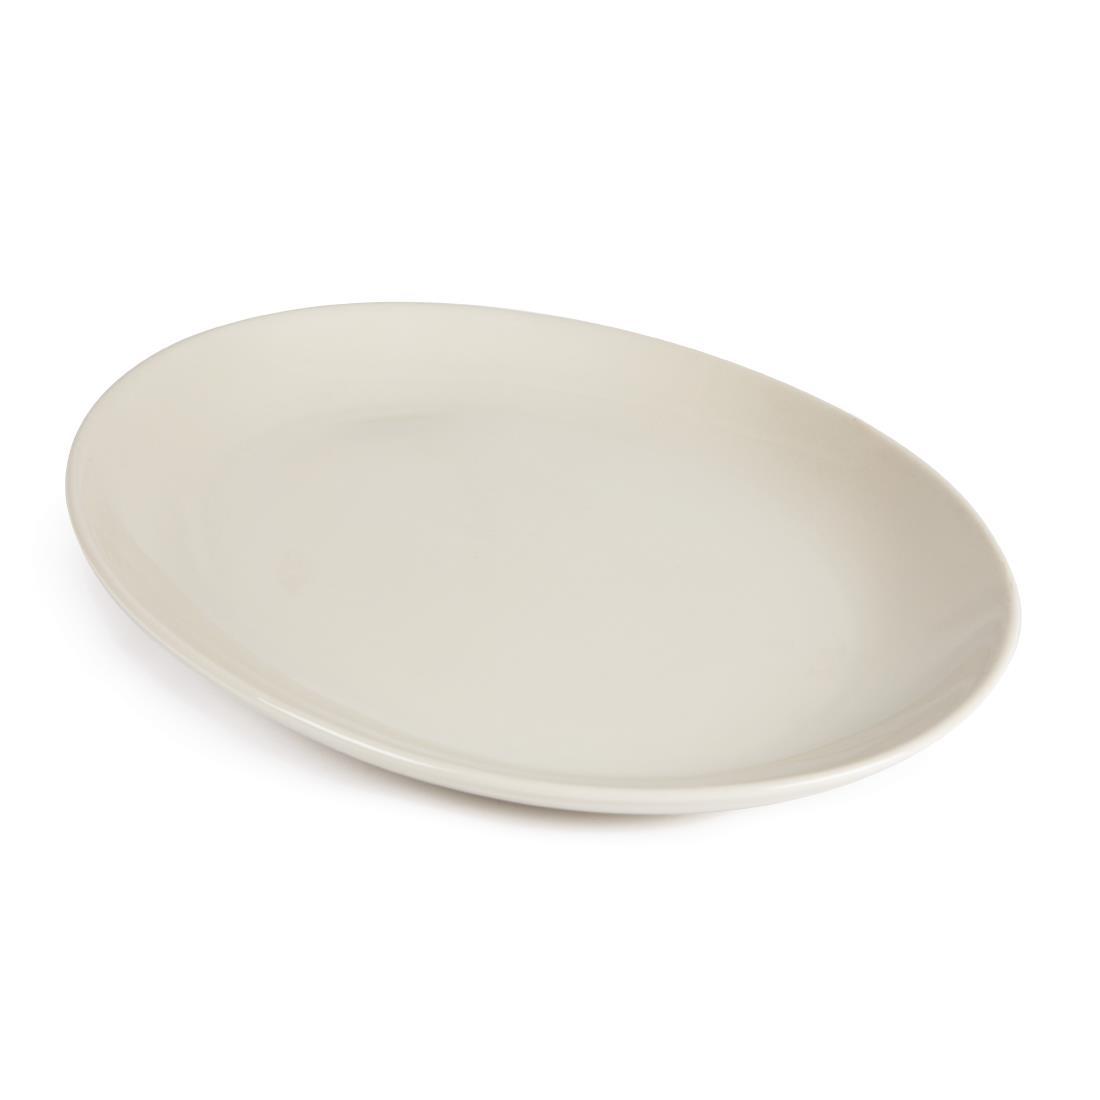 Olympia Ivory Oval Coupe Plates 330mm (Pack of 6) - U128  - 6